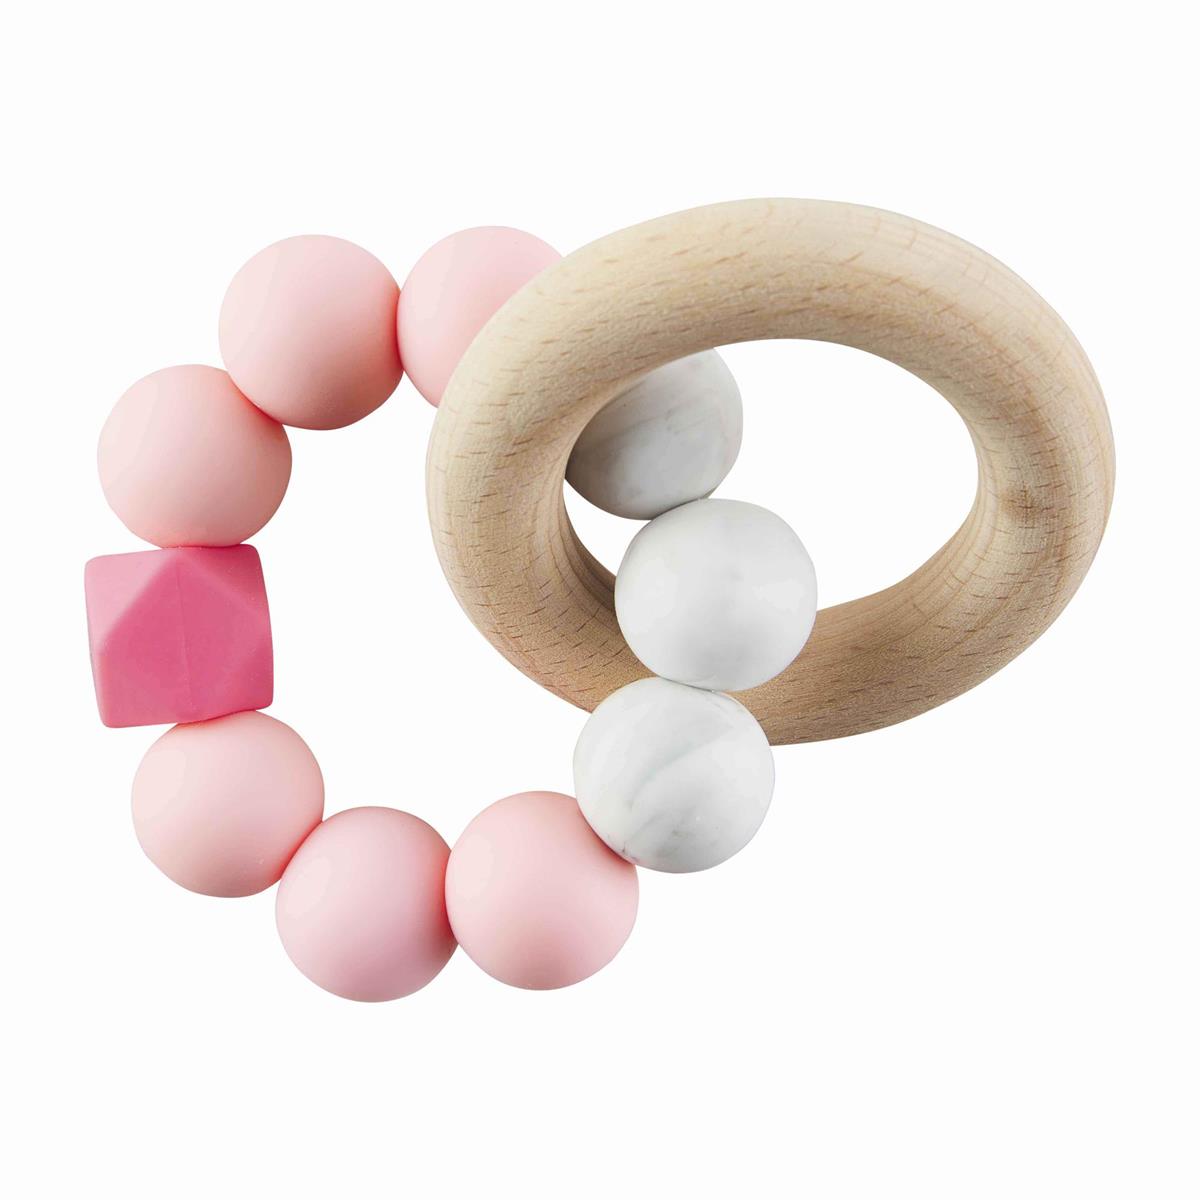 PINK SILICONE WOOD TEETHER